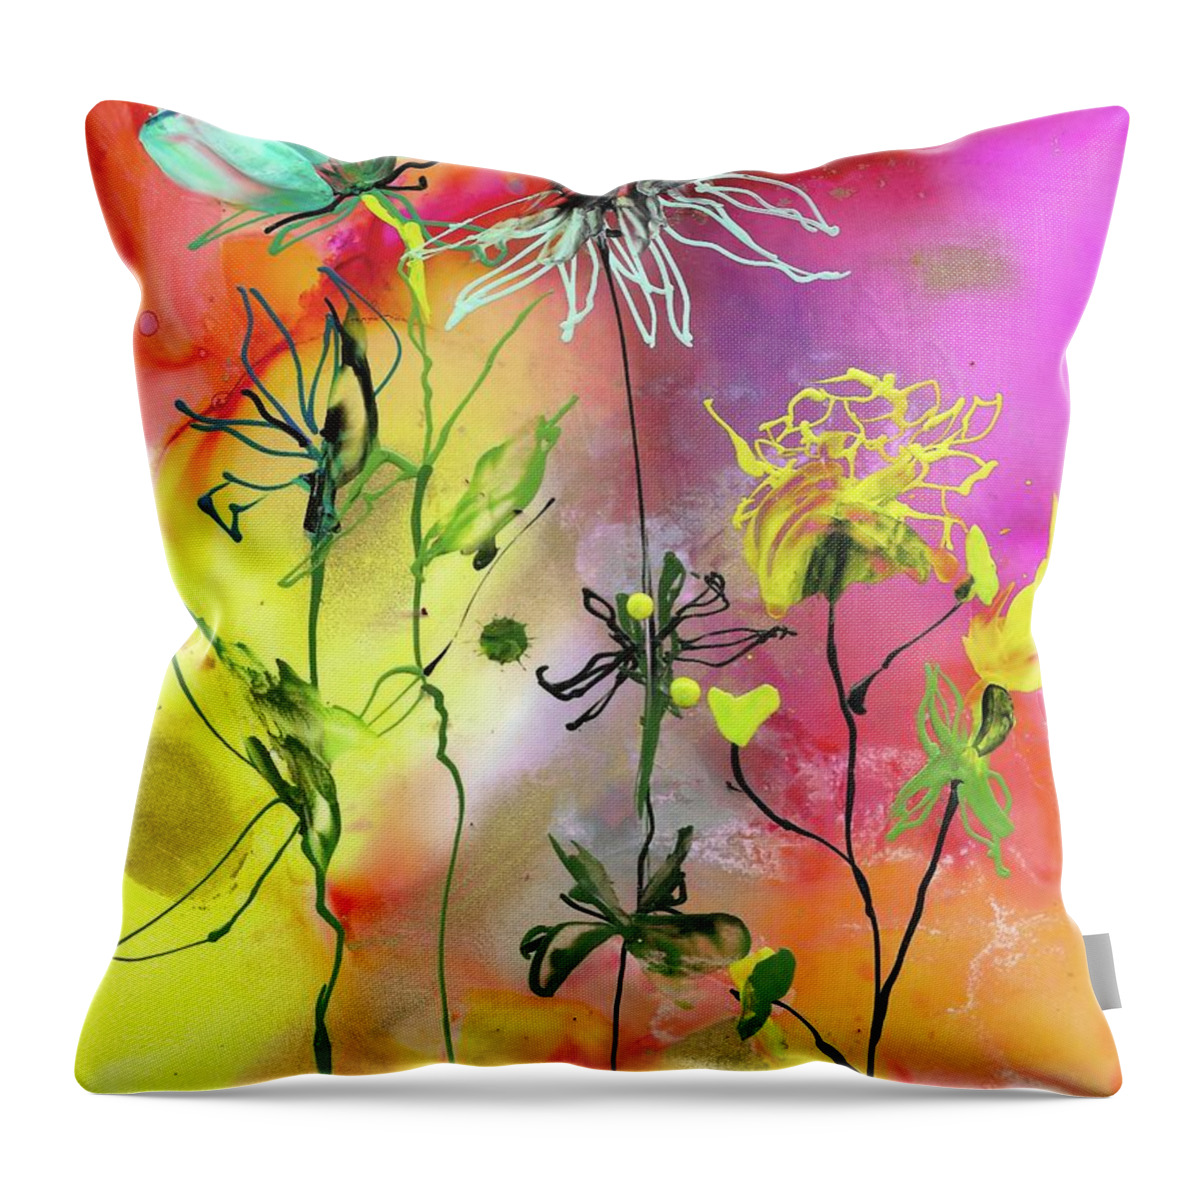 Playful Throw Pillow featuring the painting Playtime by Bonny Butler